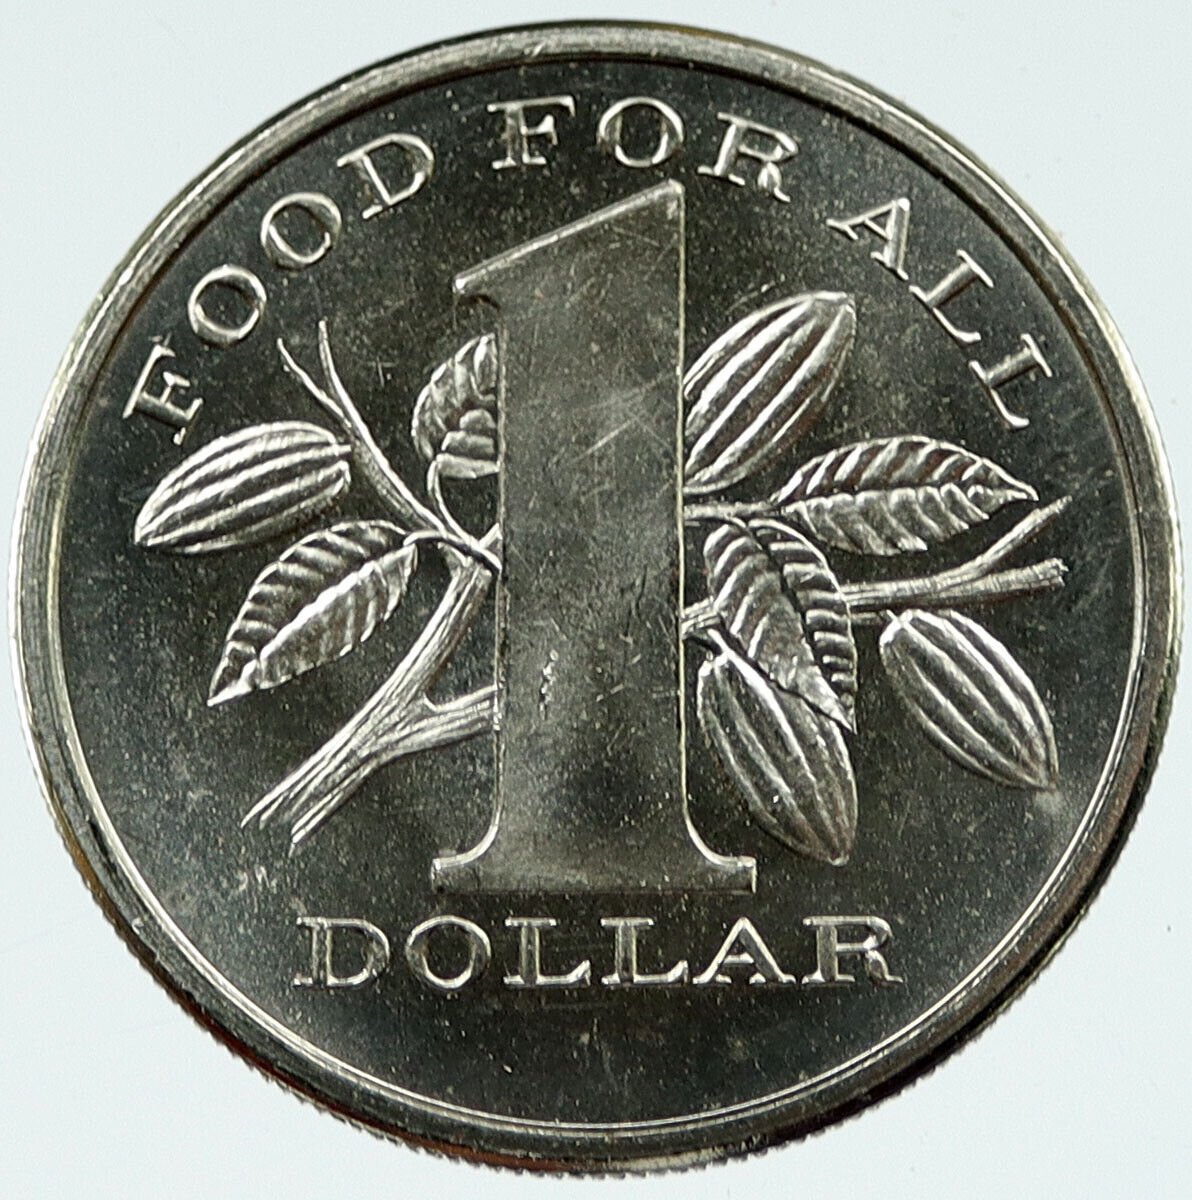 1979 TRINIDAD and TOBAGO FAO Food for All Antique One Dollar Coin i118722